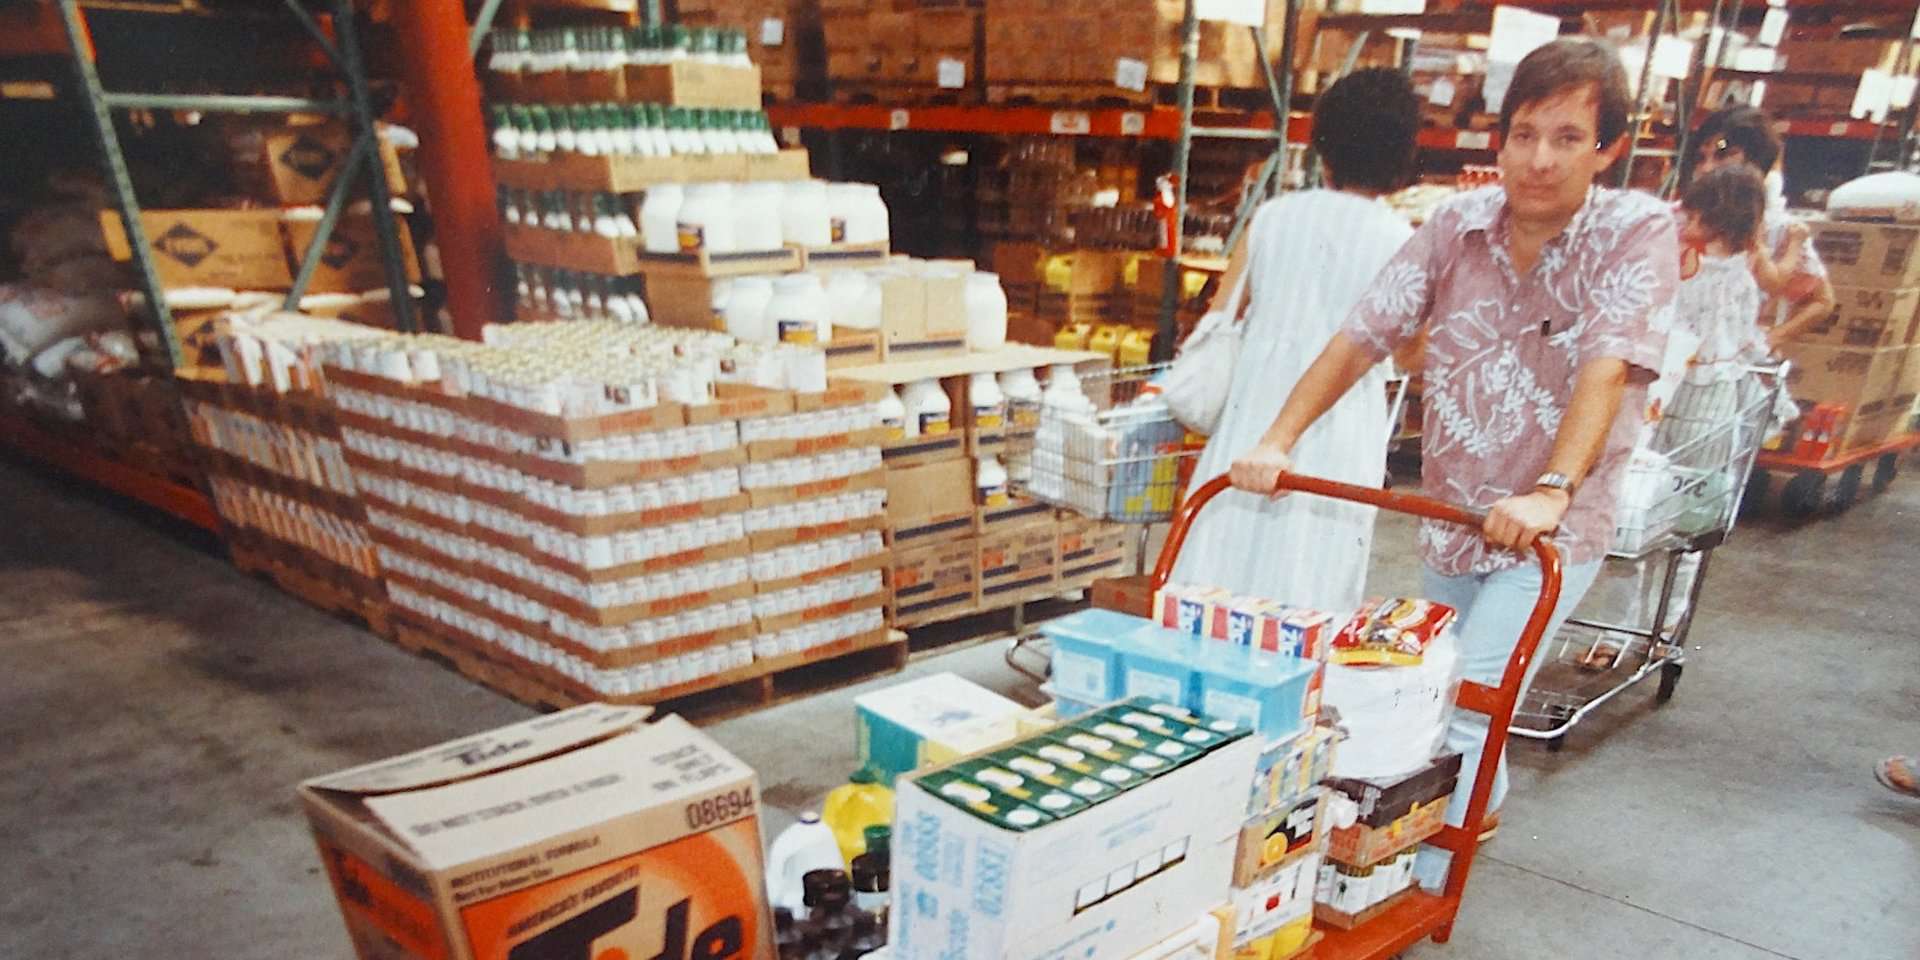 Taboola Ad Example 67725 - Here's What Costco Looked Like When It Opened In 1983 And The Annual Membership Was $25